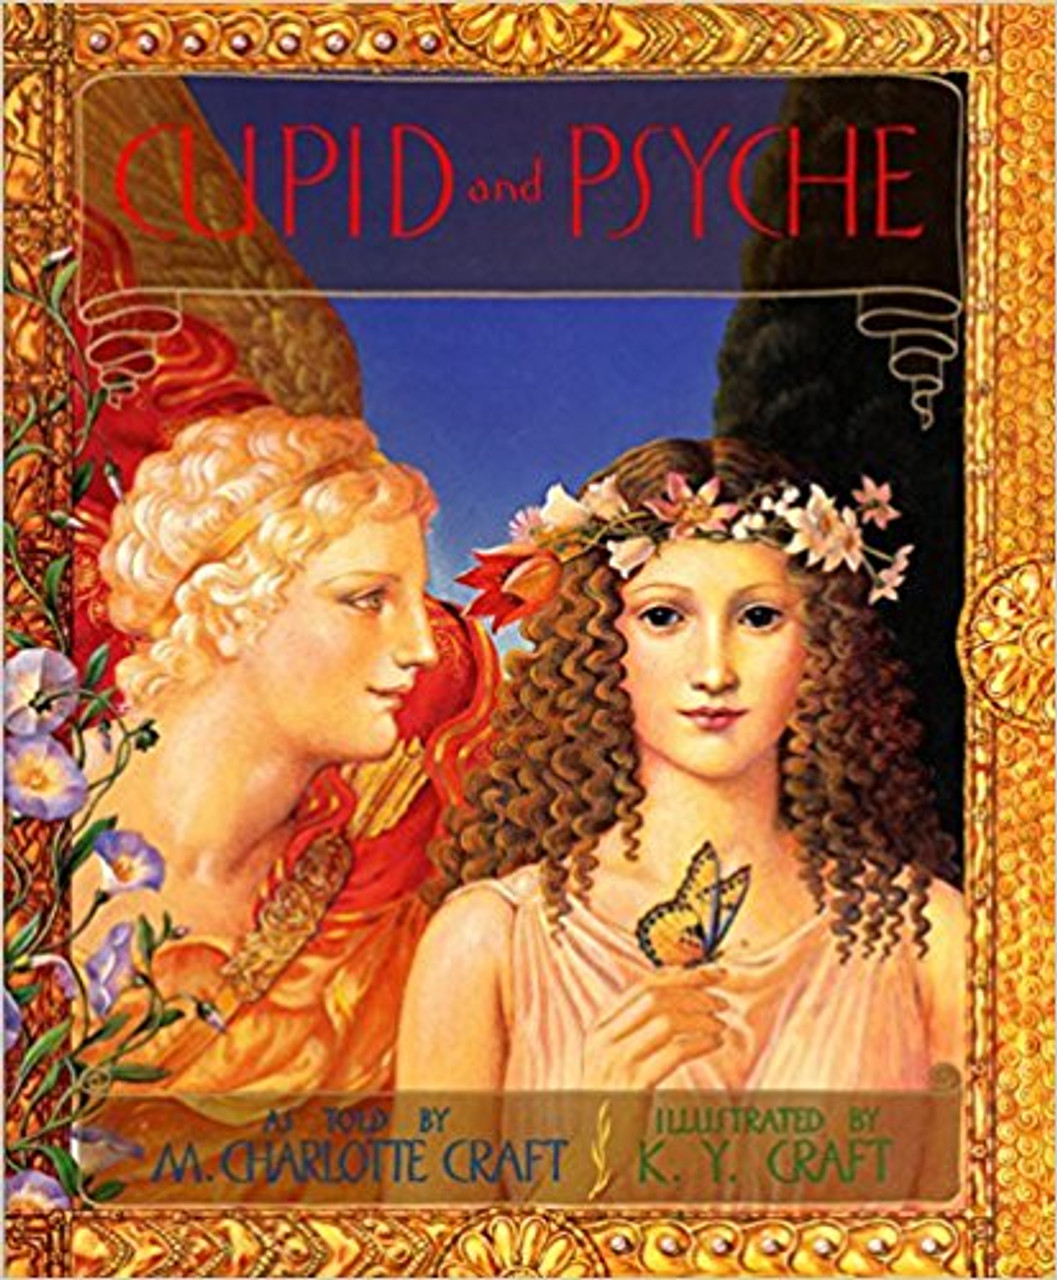 Cupid and Psyche by M Charlotte Craft